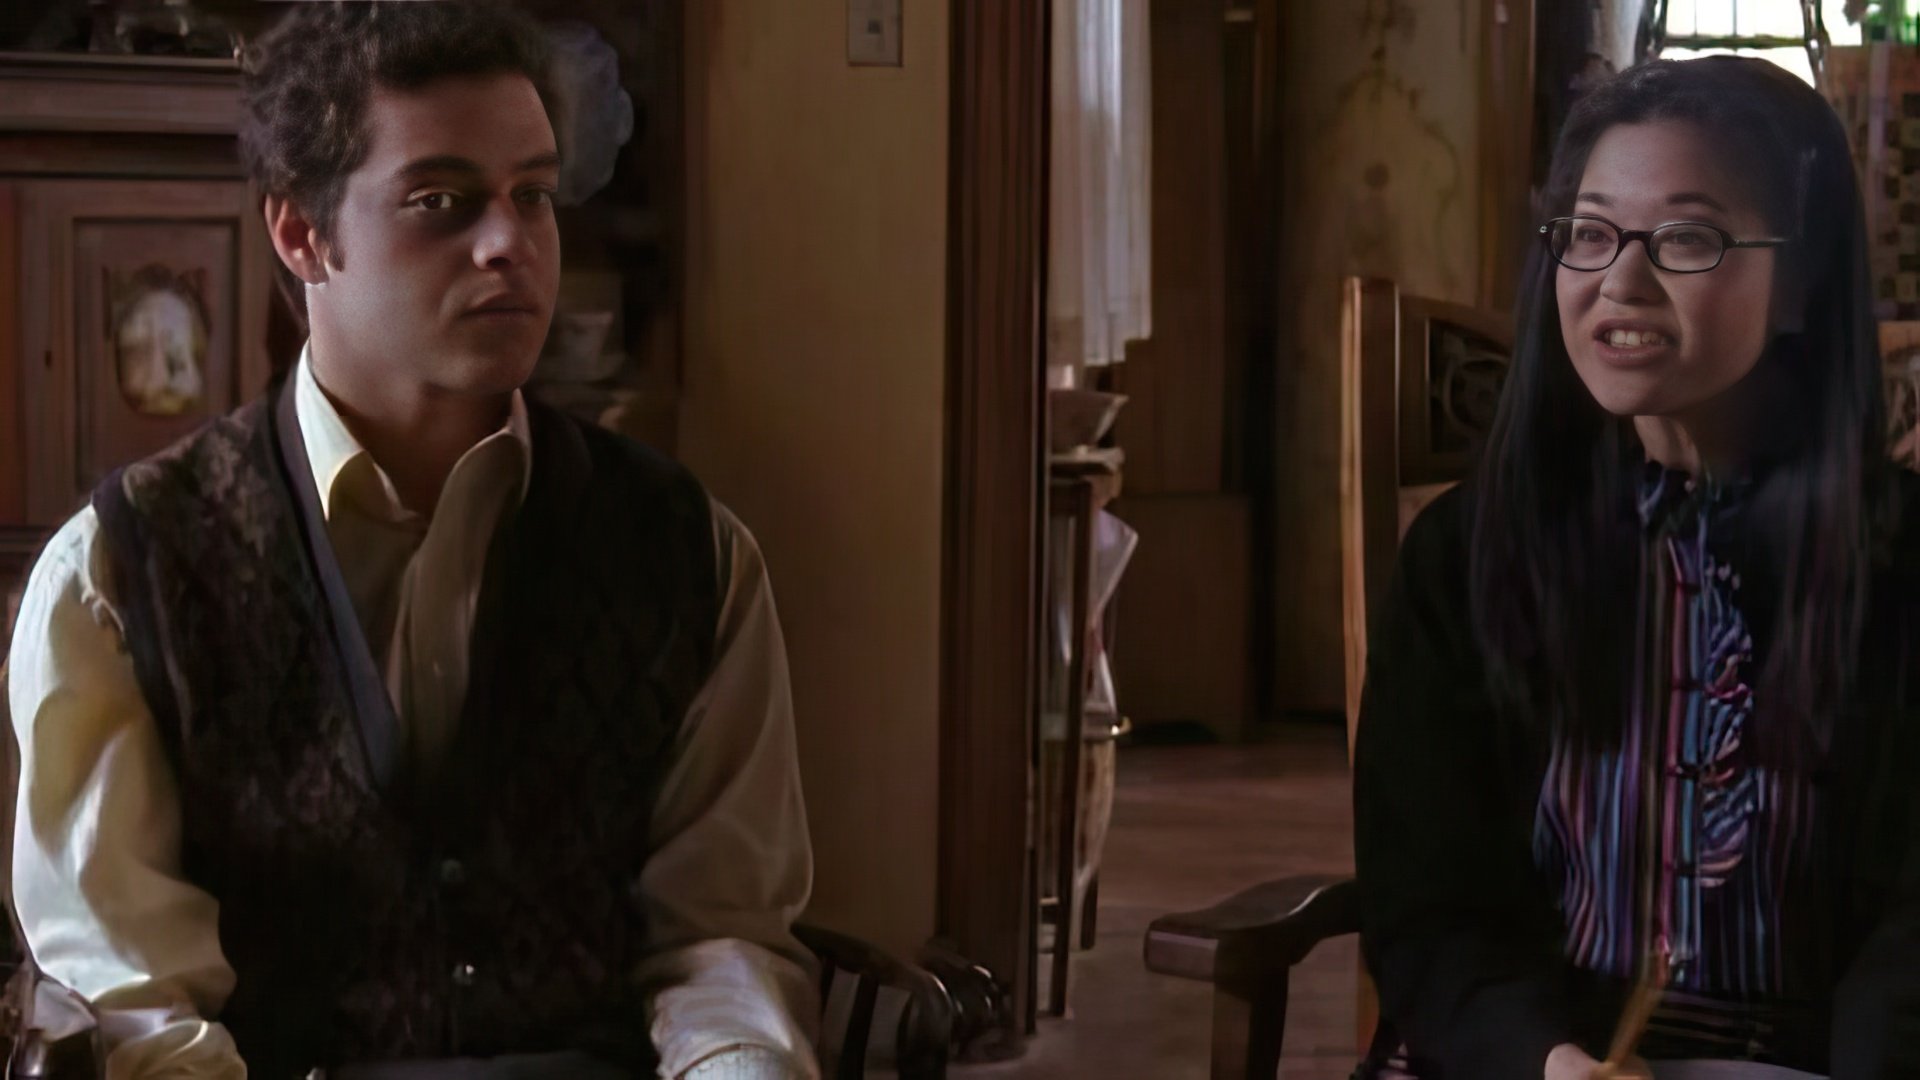 Rami Malek's first role – Andy from the series 'Gilmore Girls'